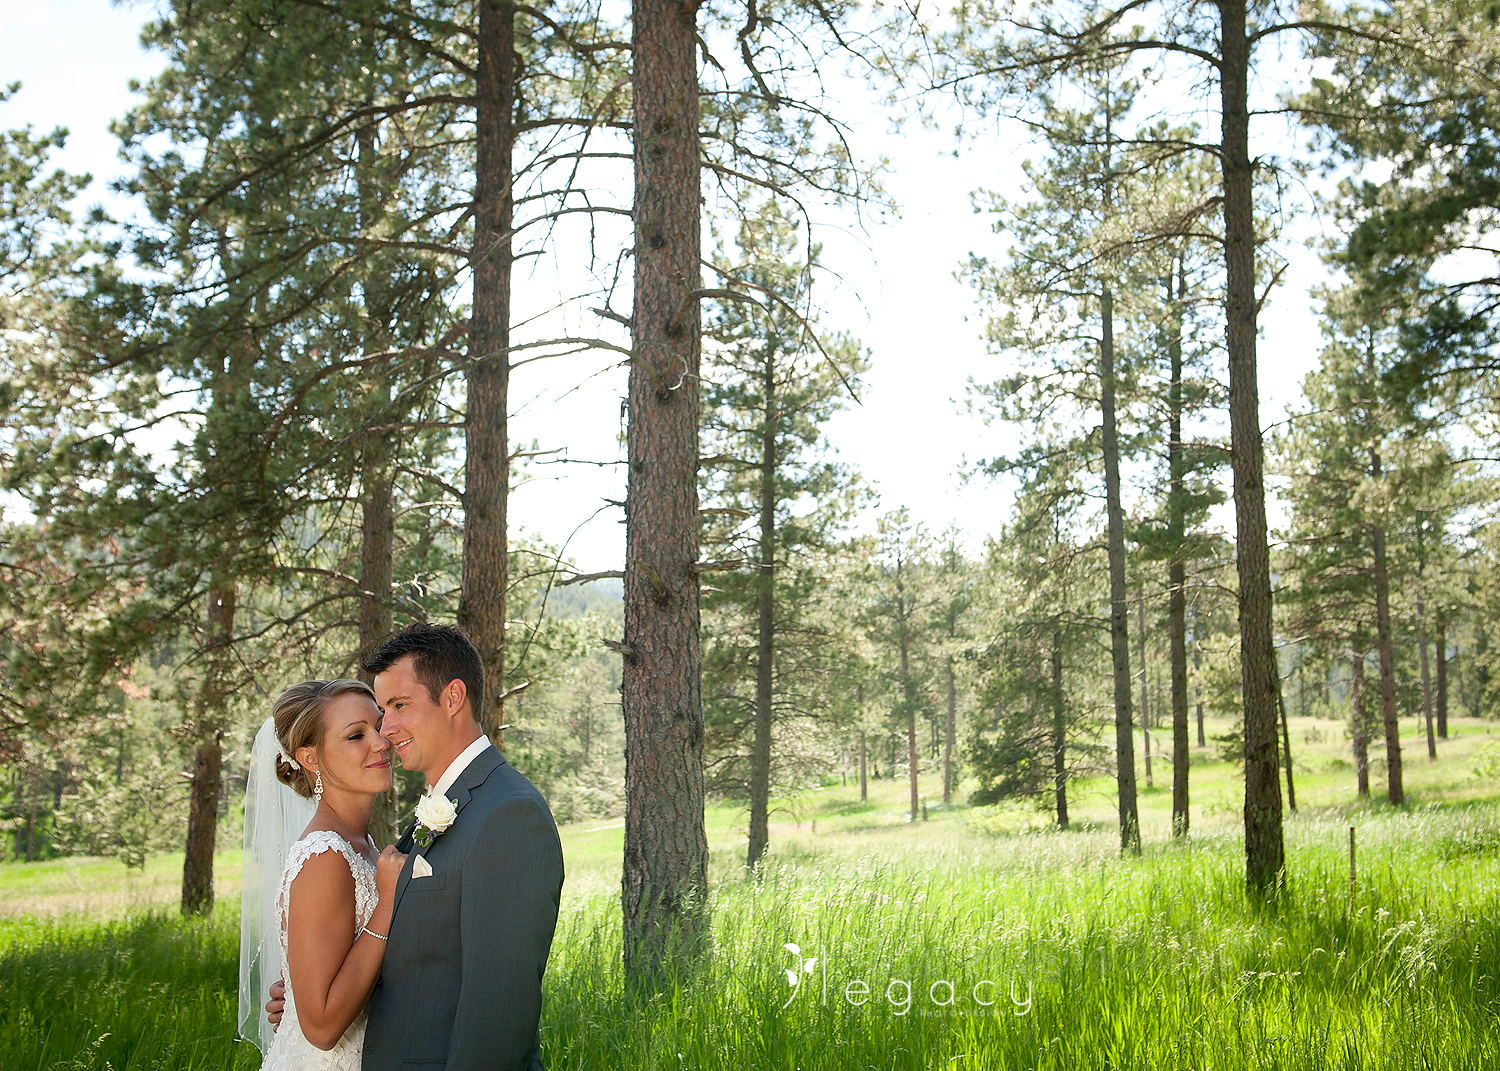 009 Jessica and Carl Black Hills Receptions and Rentals South Dakota Wedding Anythings Possible Catering Roots Floral Piece of Cake Legacy Photo and Design